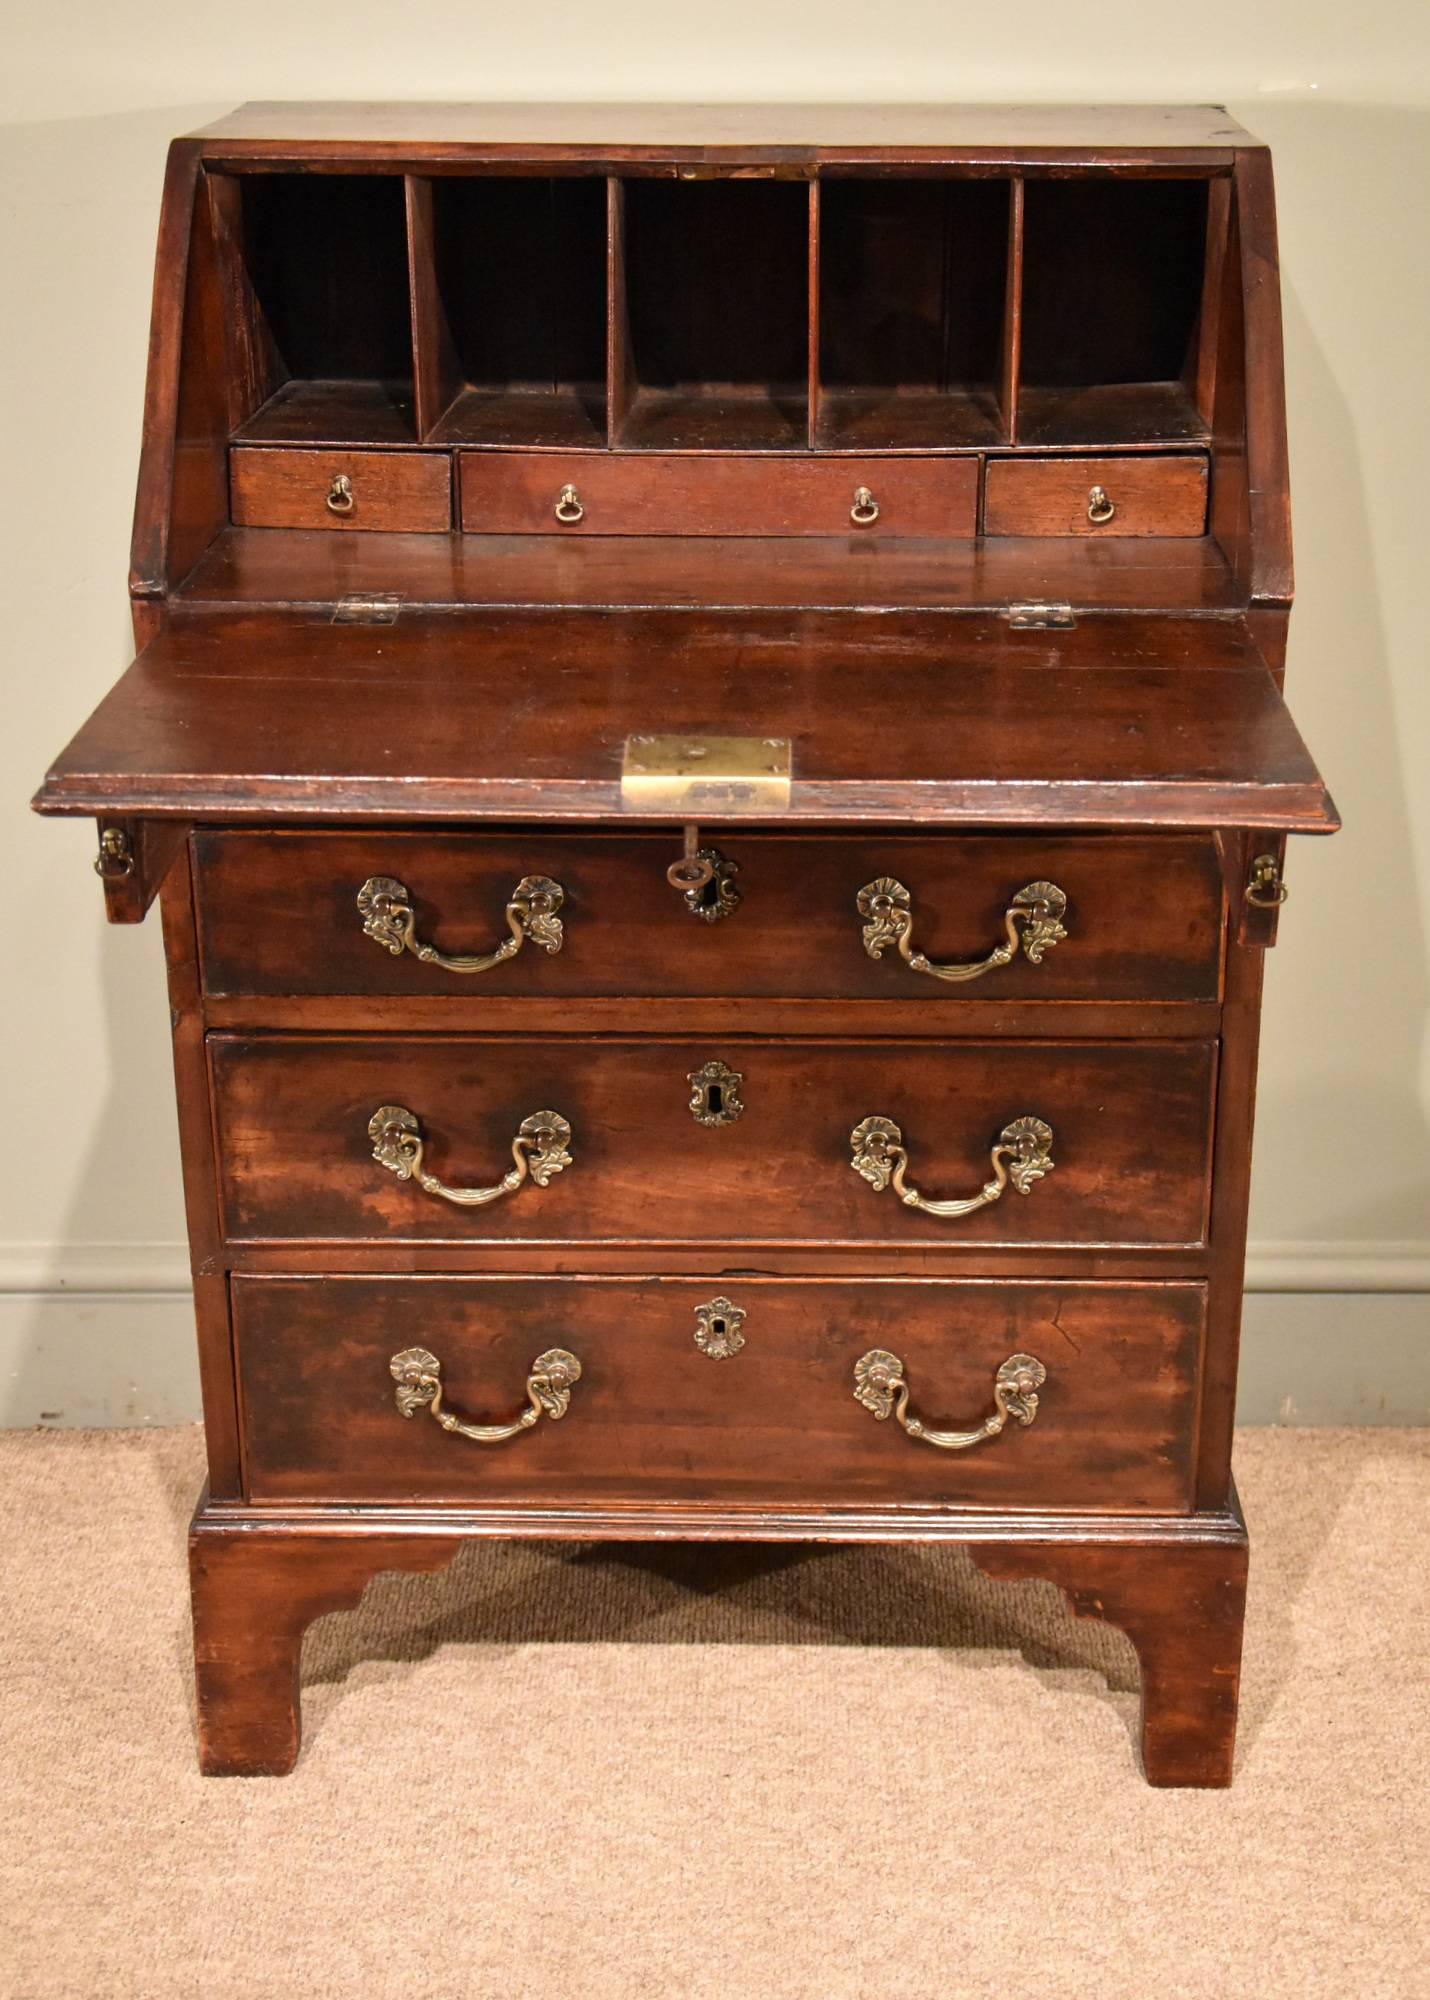 A Diminutive George III mahogany bureau of superb color only 24 wide 

Dimensions:
Height 37